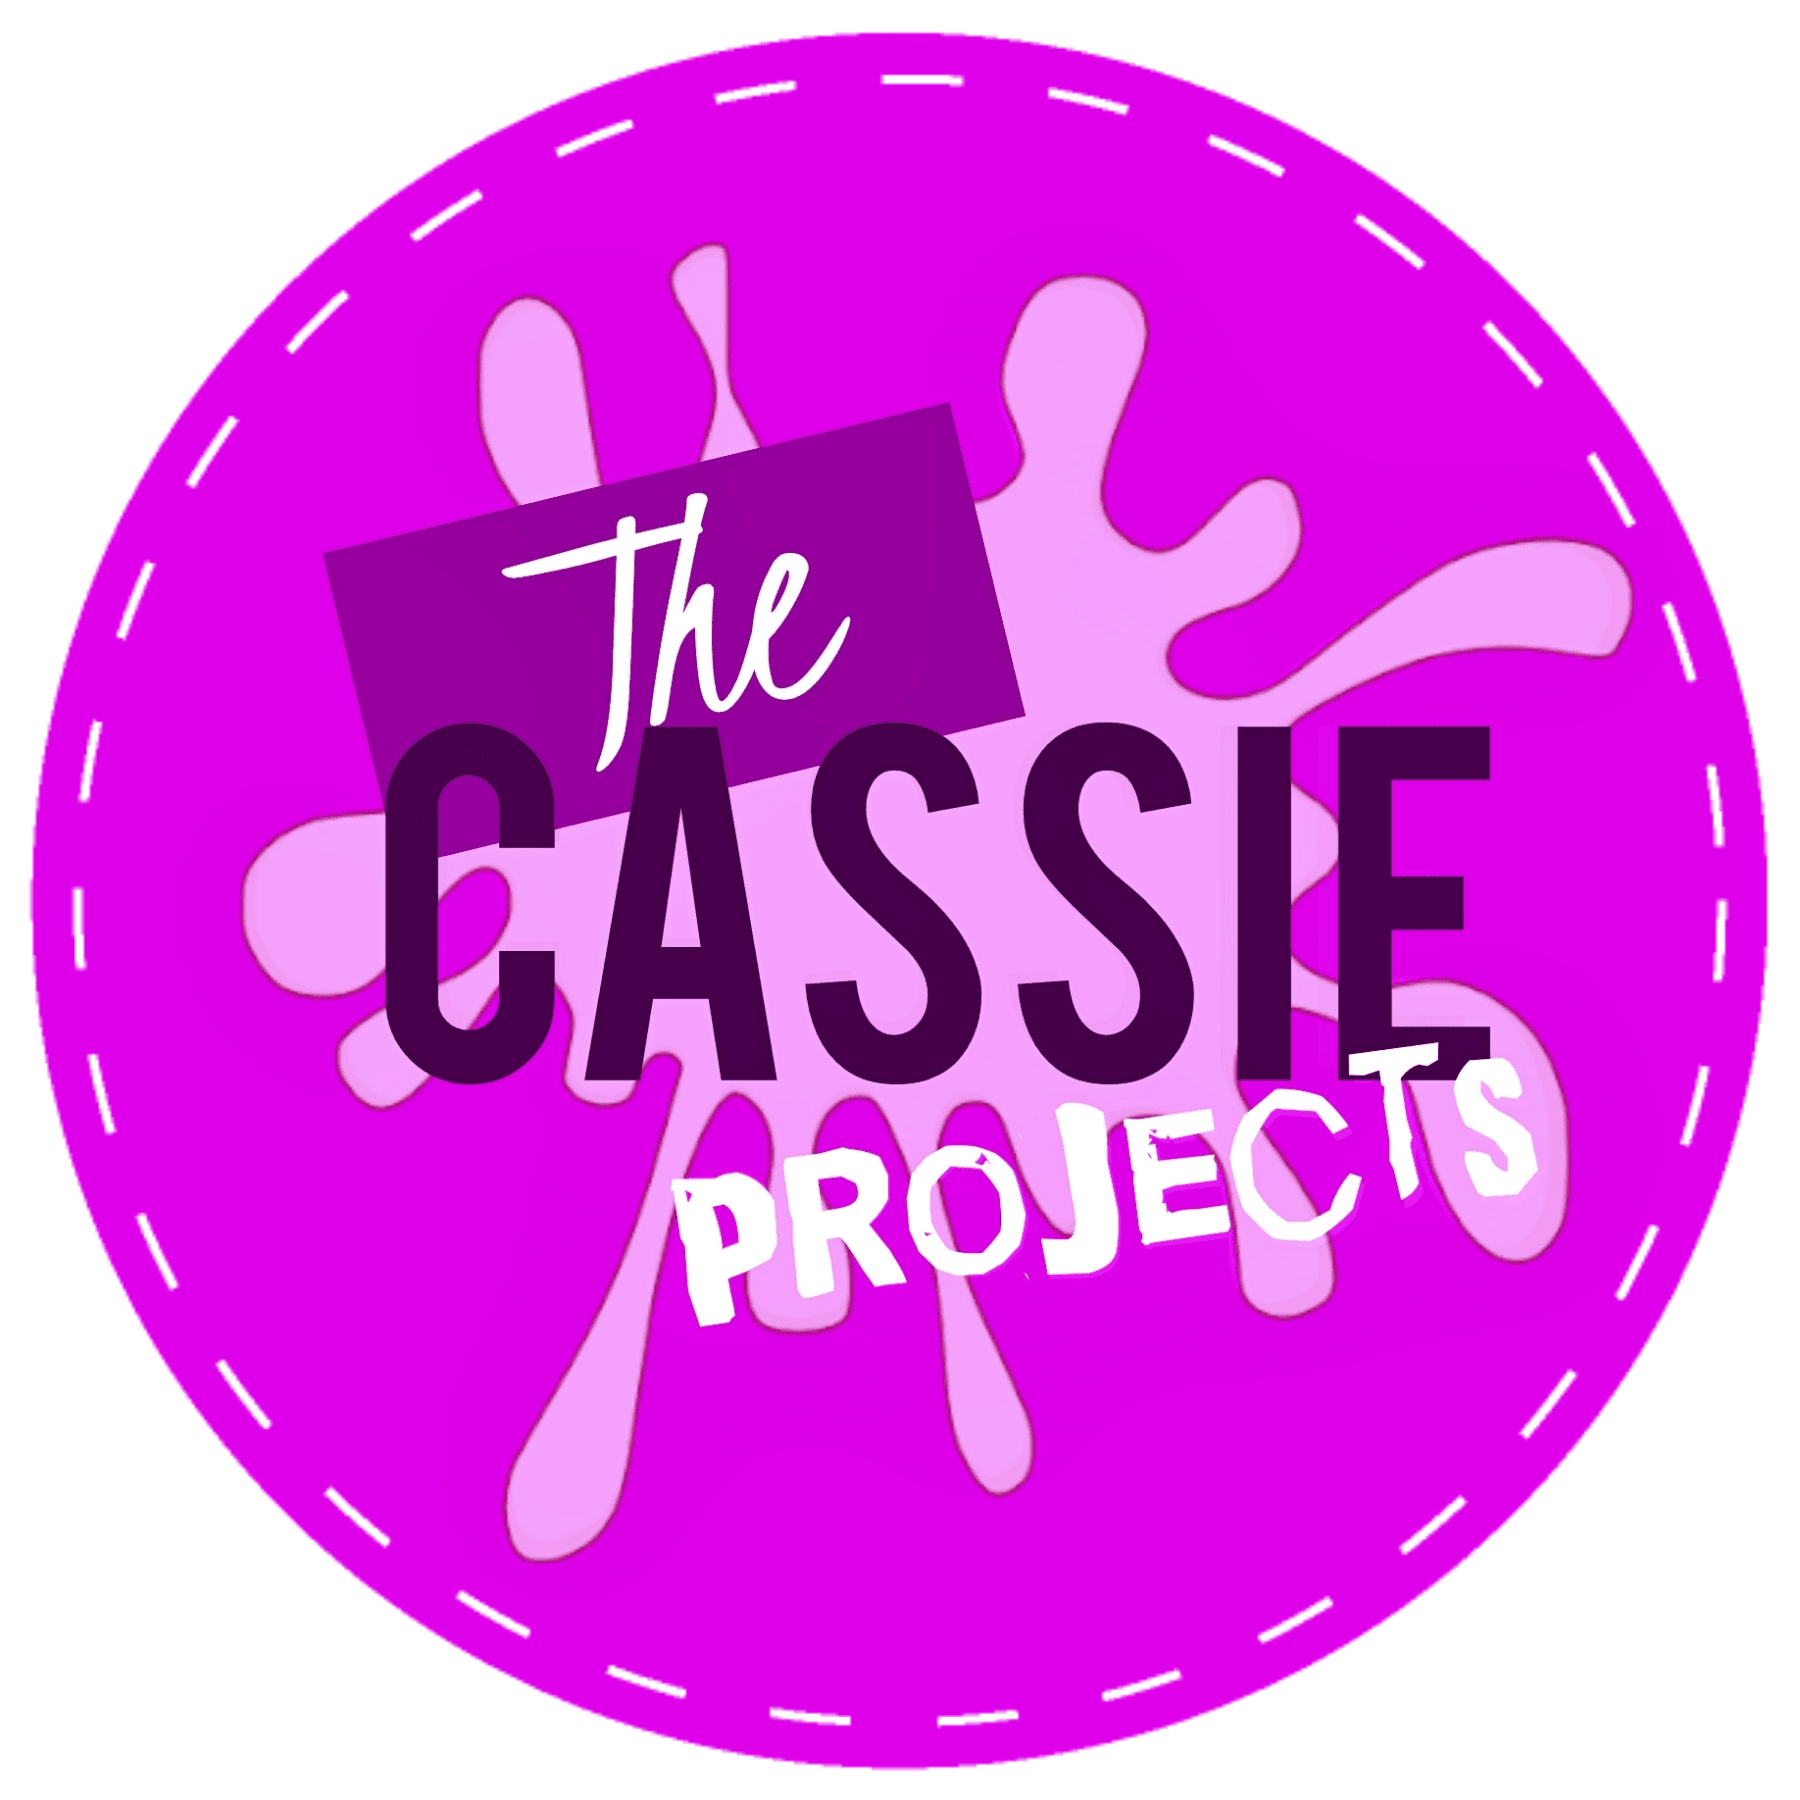 The Cassie Projects